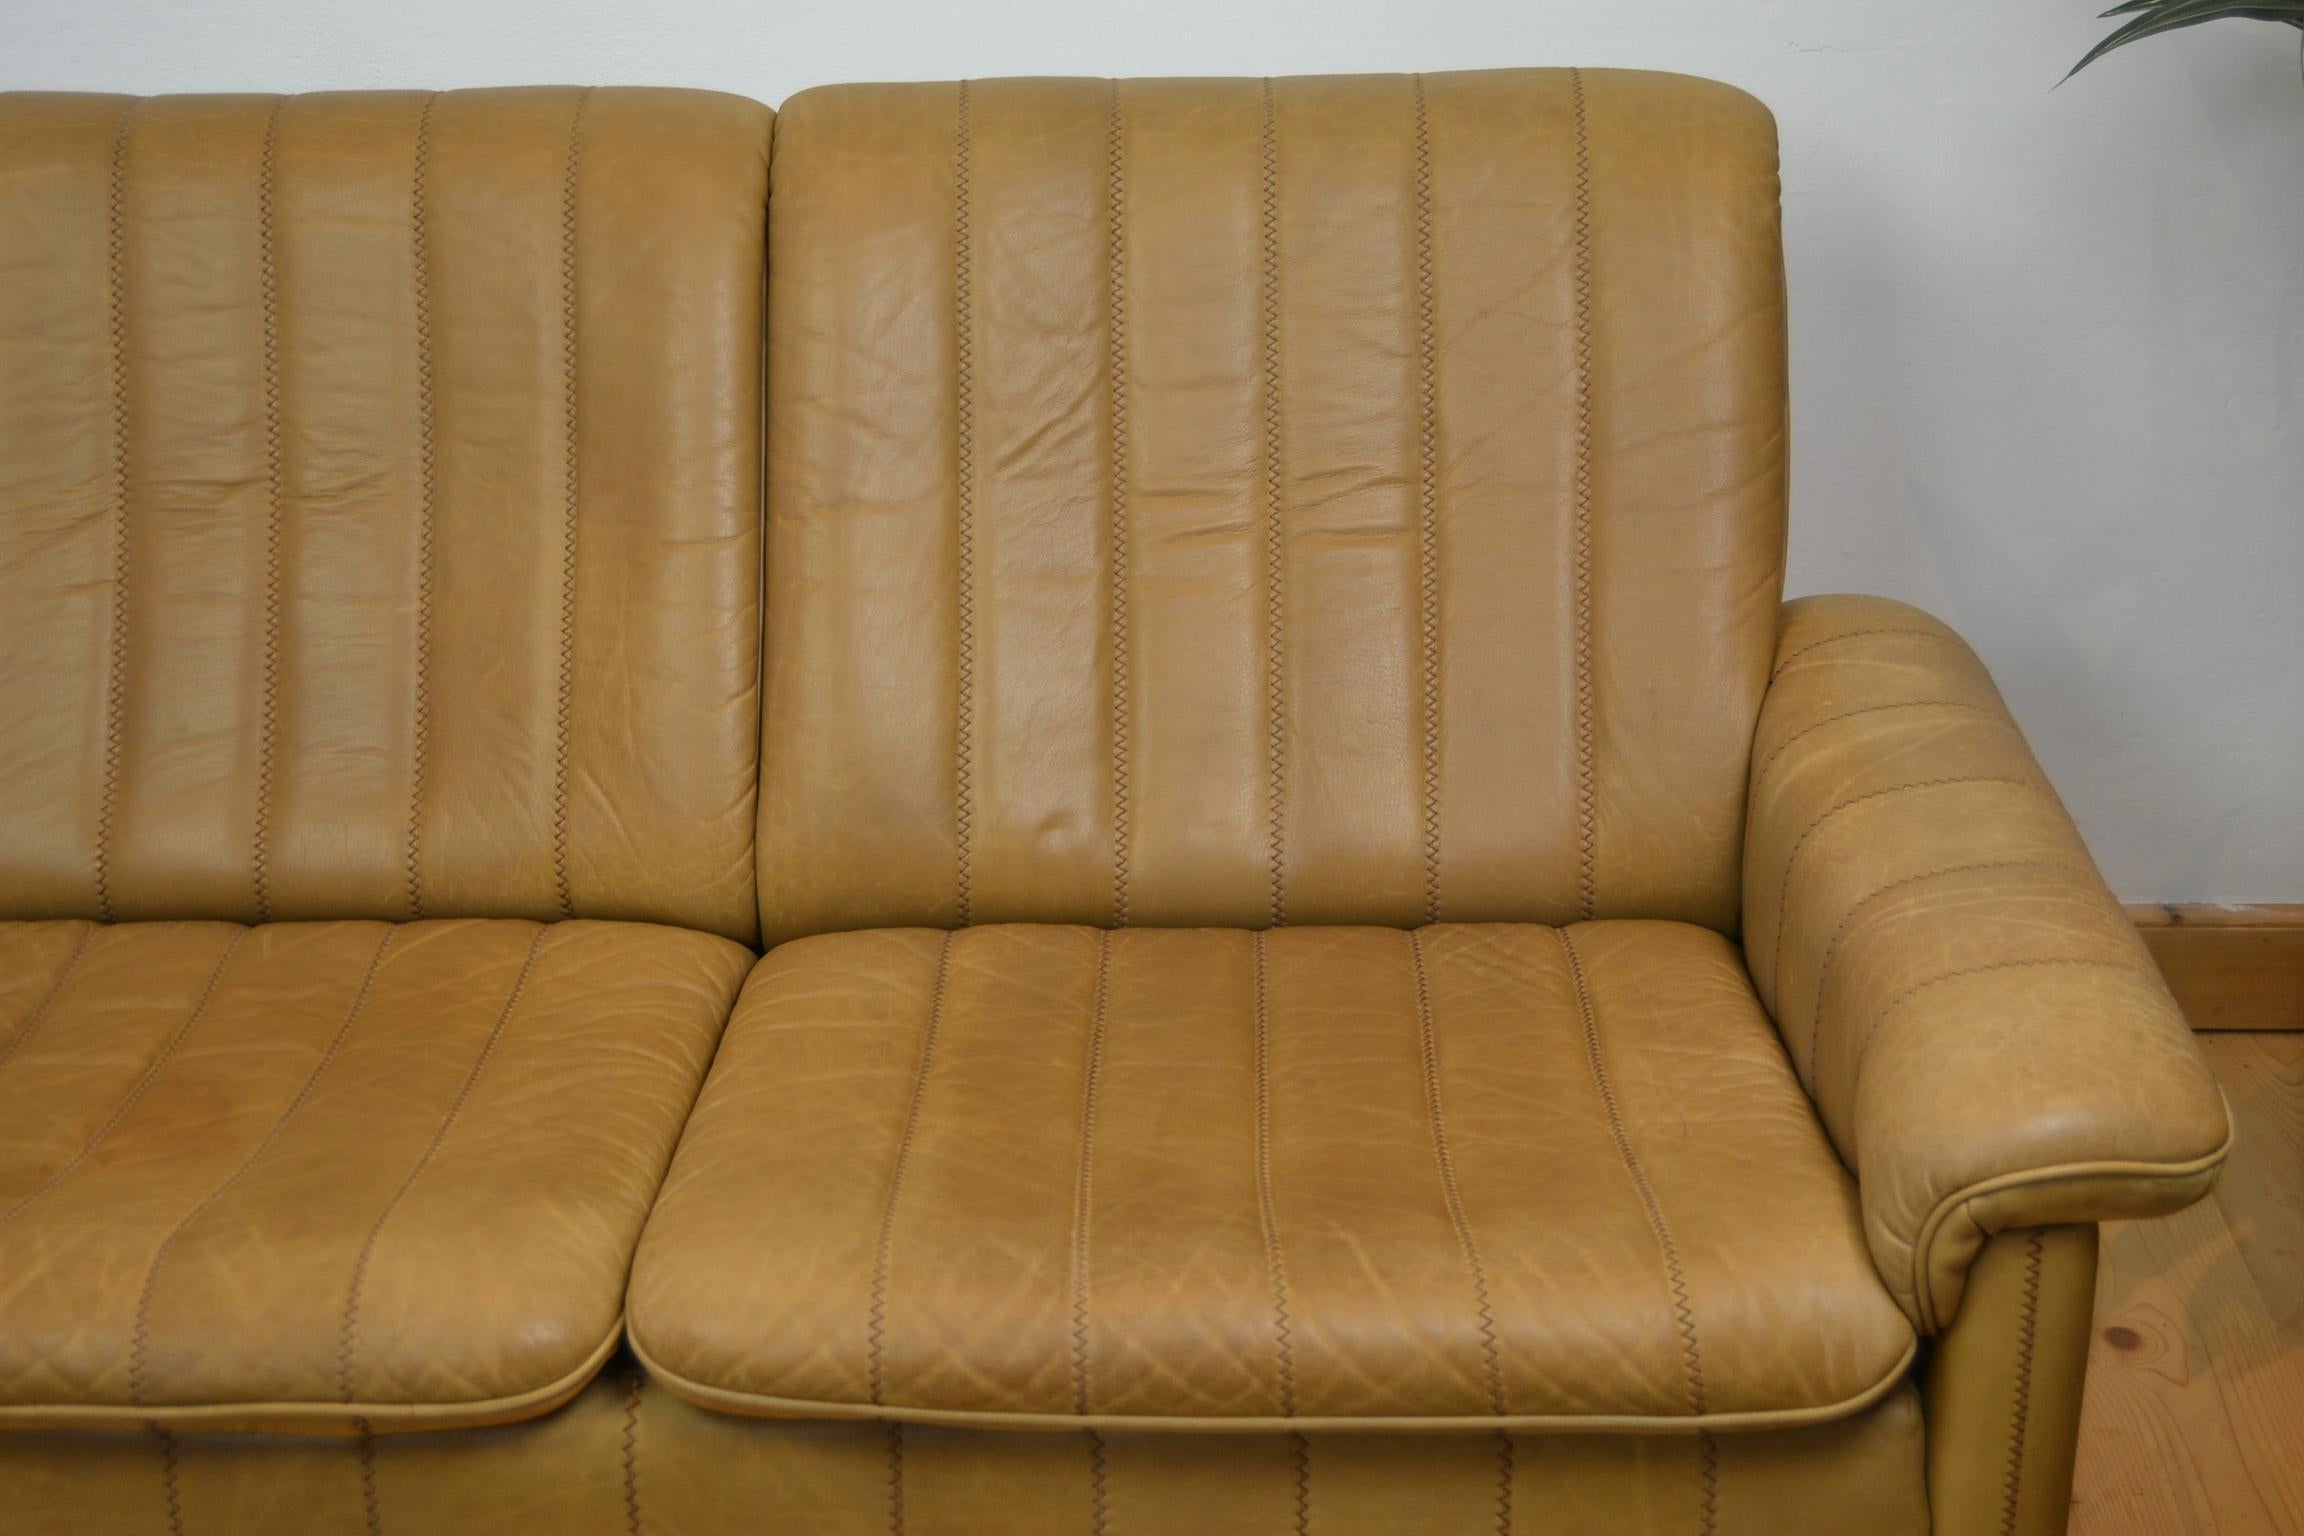 Vintage De Sede Living Room Set, 2 Lounge Chairs and Sofa, Brown Leather 1